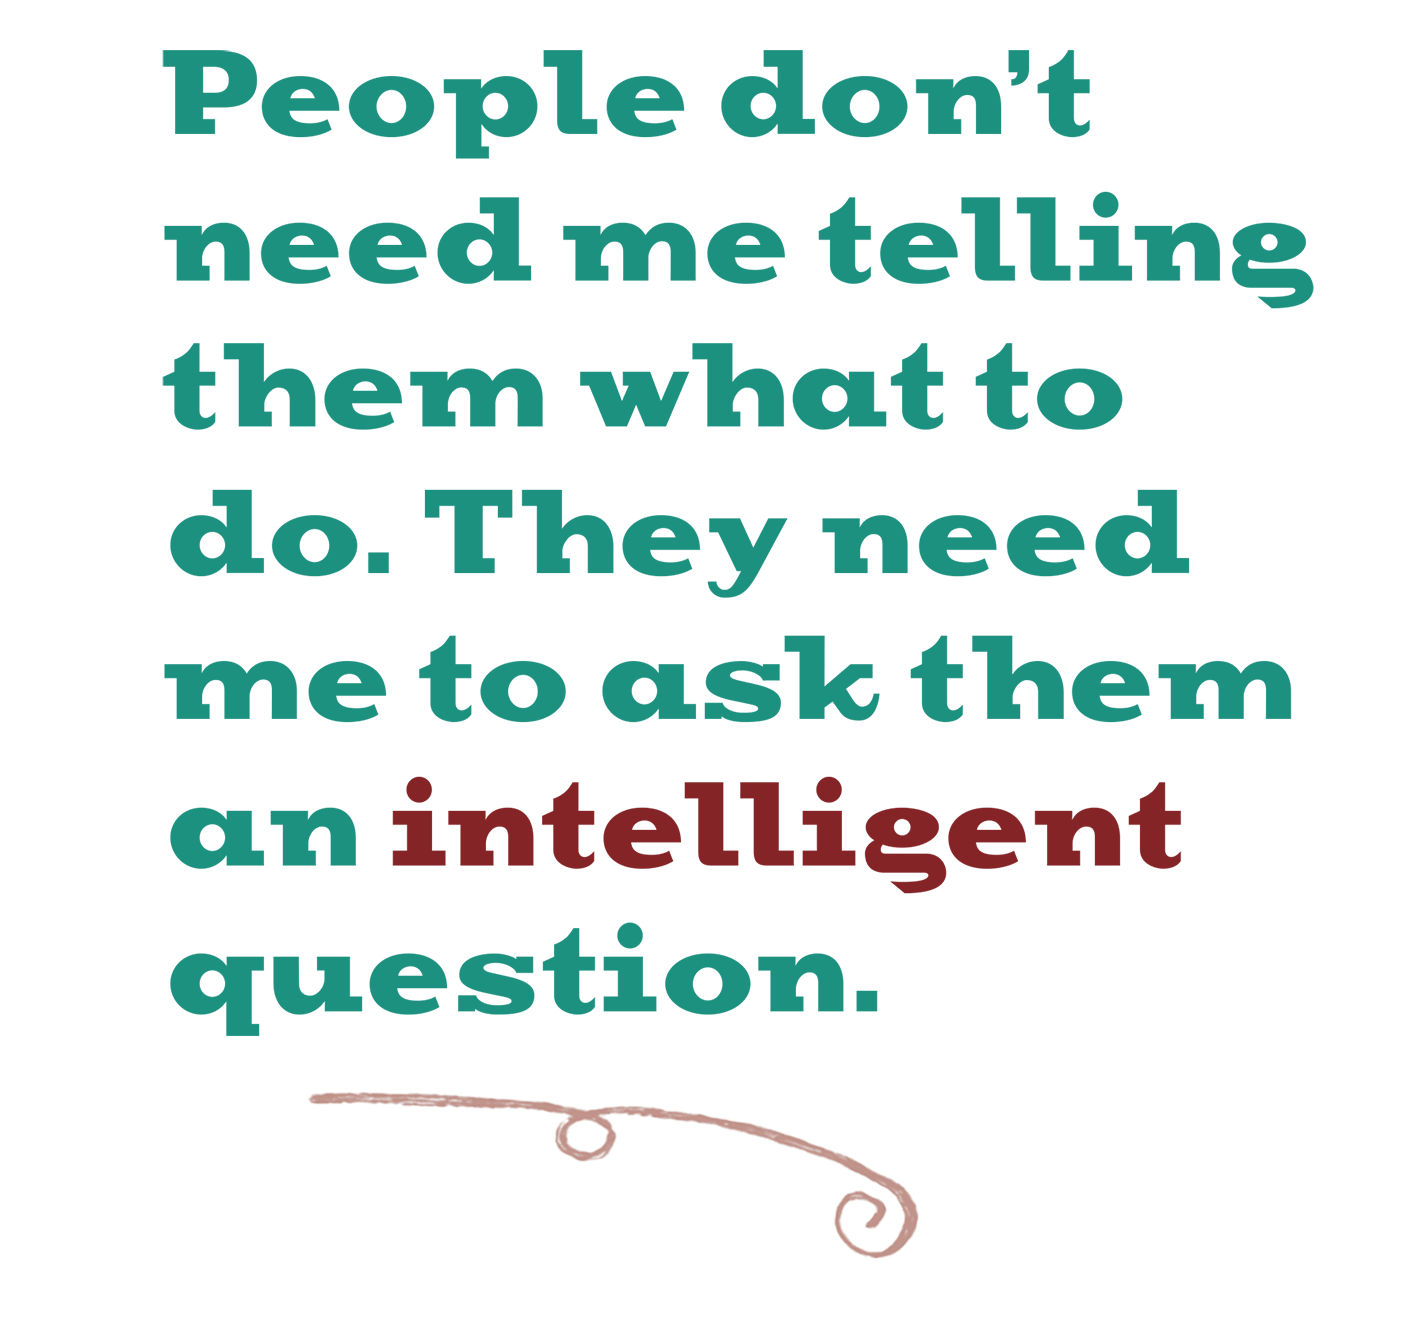 Designed Pull Quote Reads: People don&rsquo;t need me telling them what to do. They need me to ask them an intelligent question.